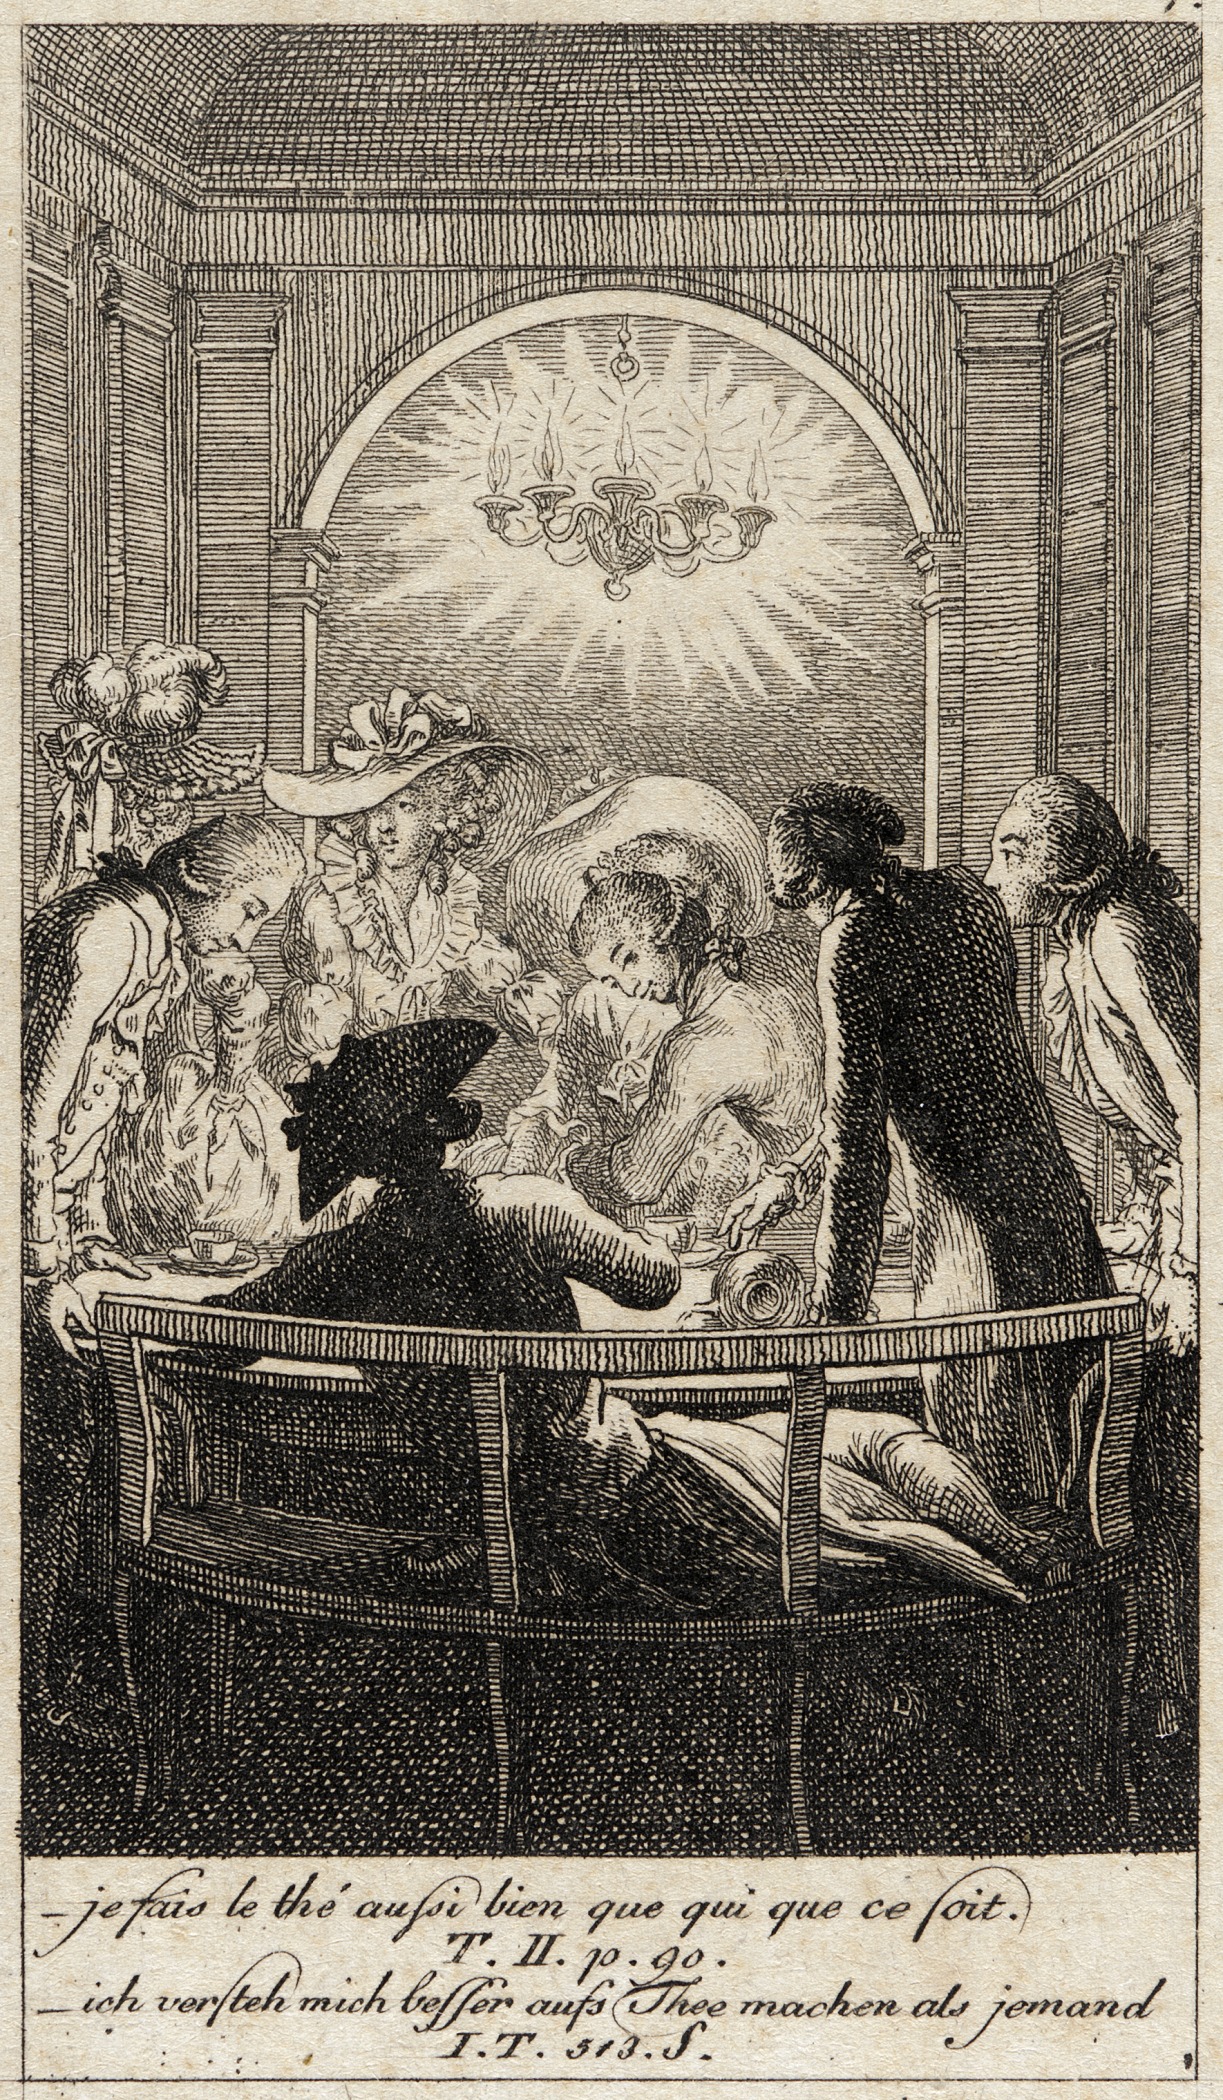 an antique black and white engraving shows people seated at a table